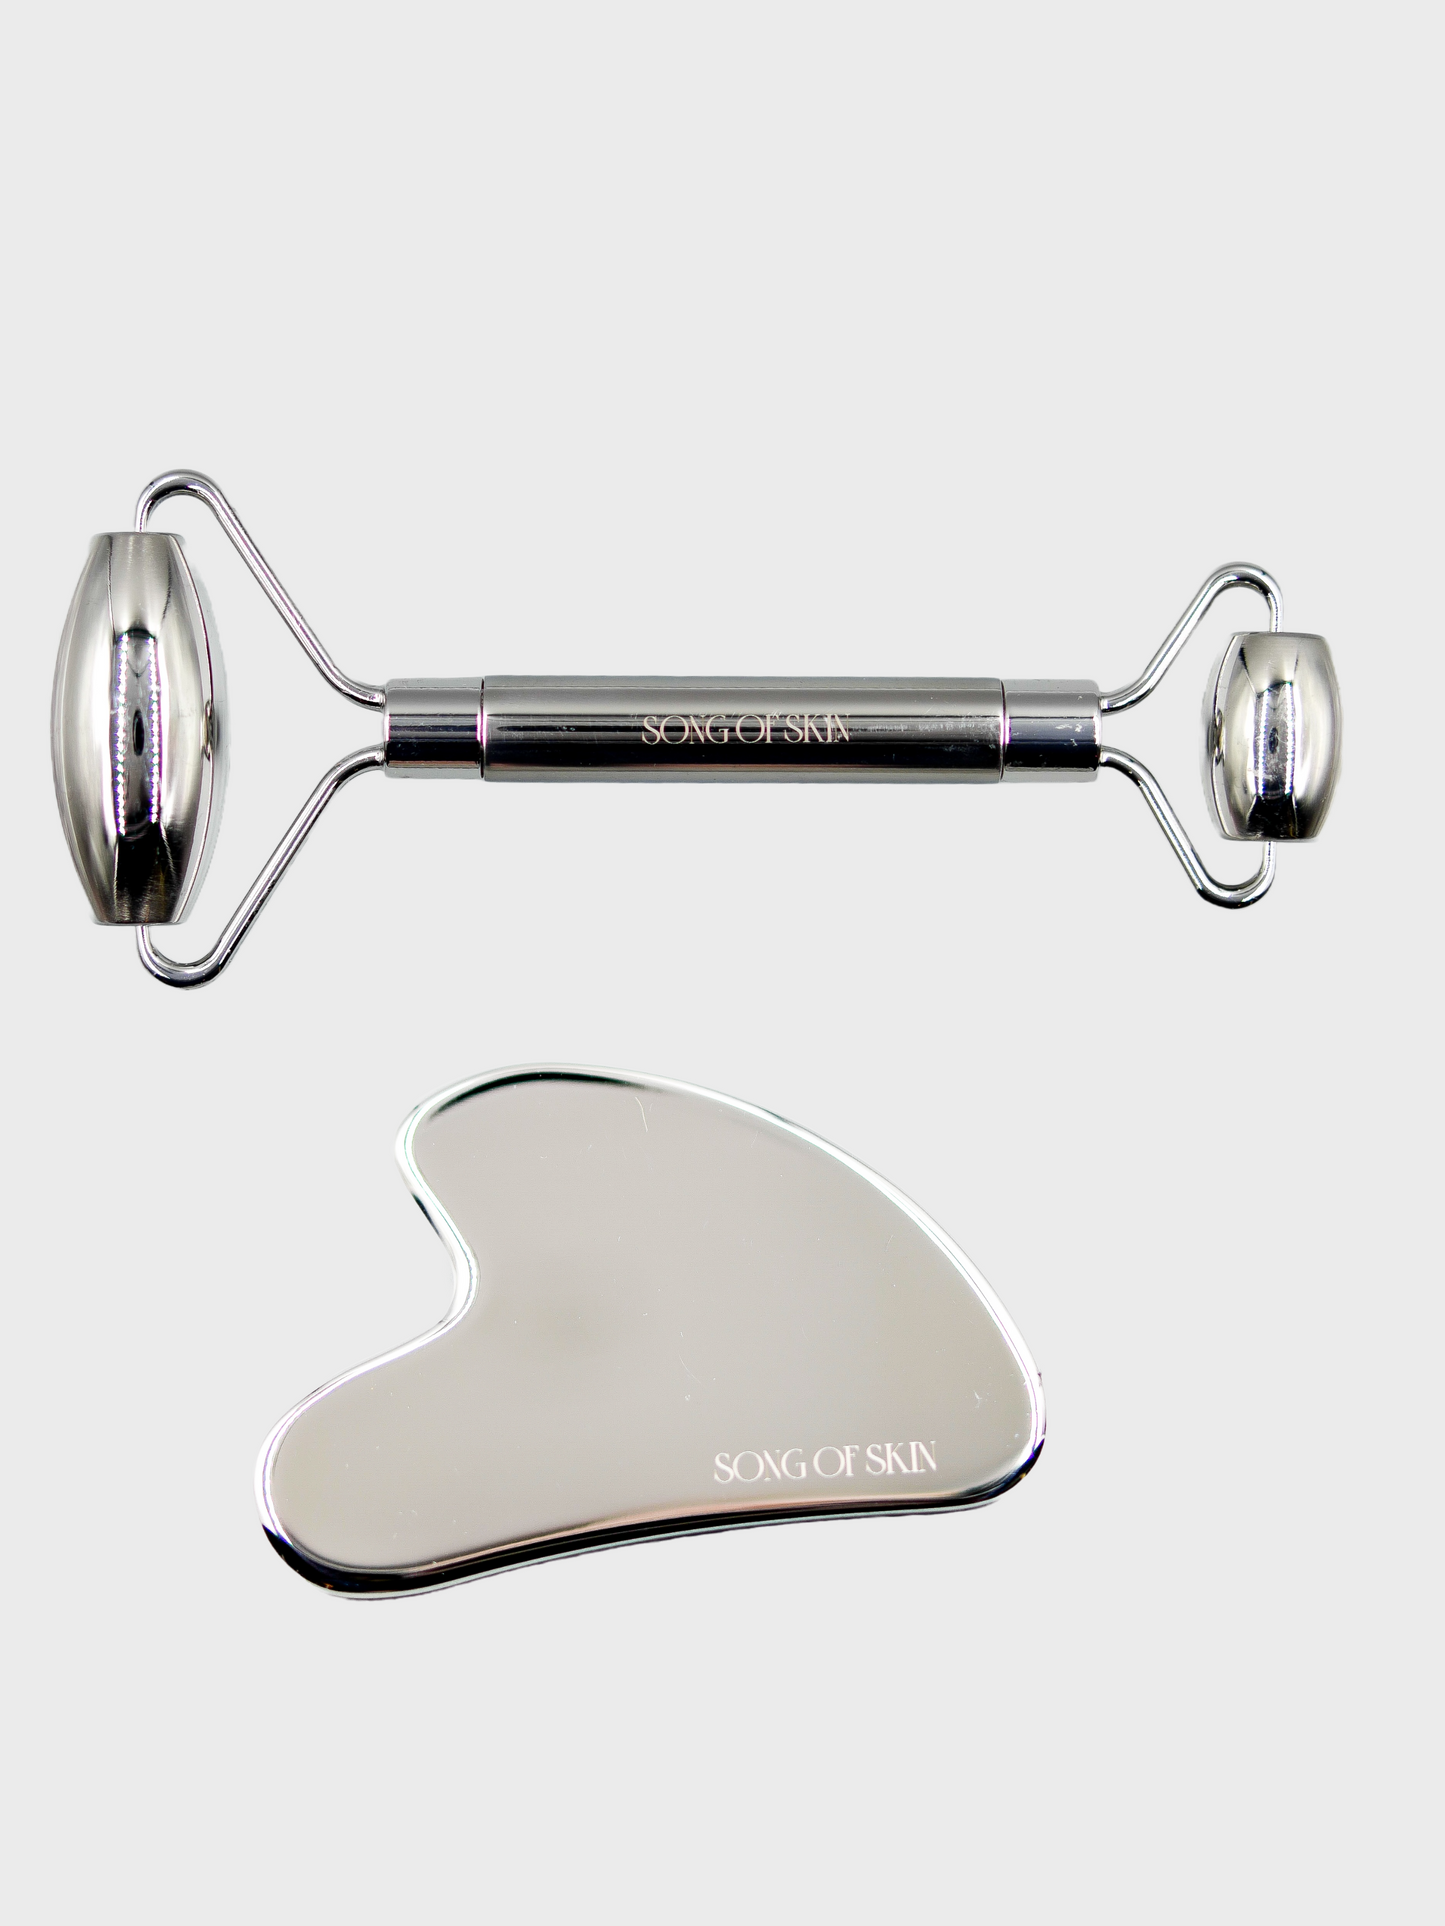 Song Of Skin Labs - Stainless Steel Gua Sha + Roller Set